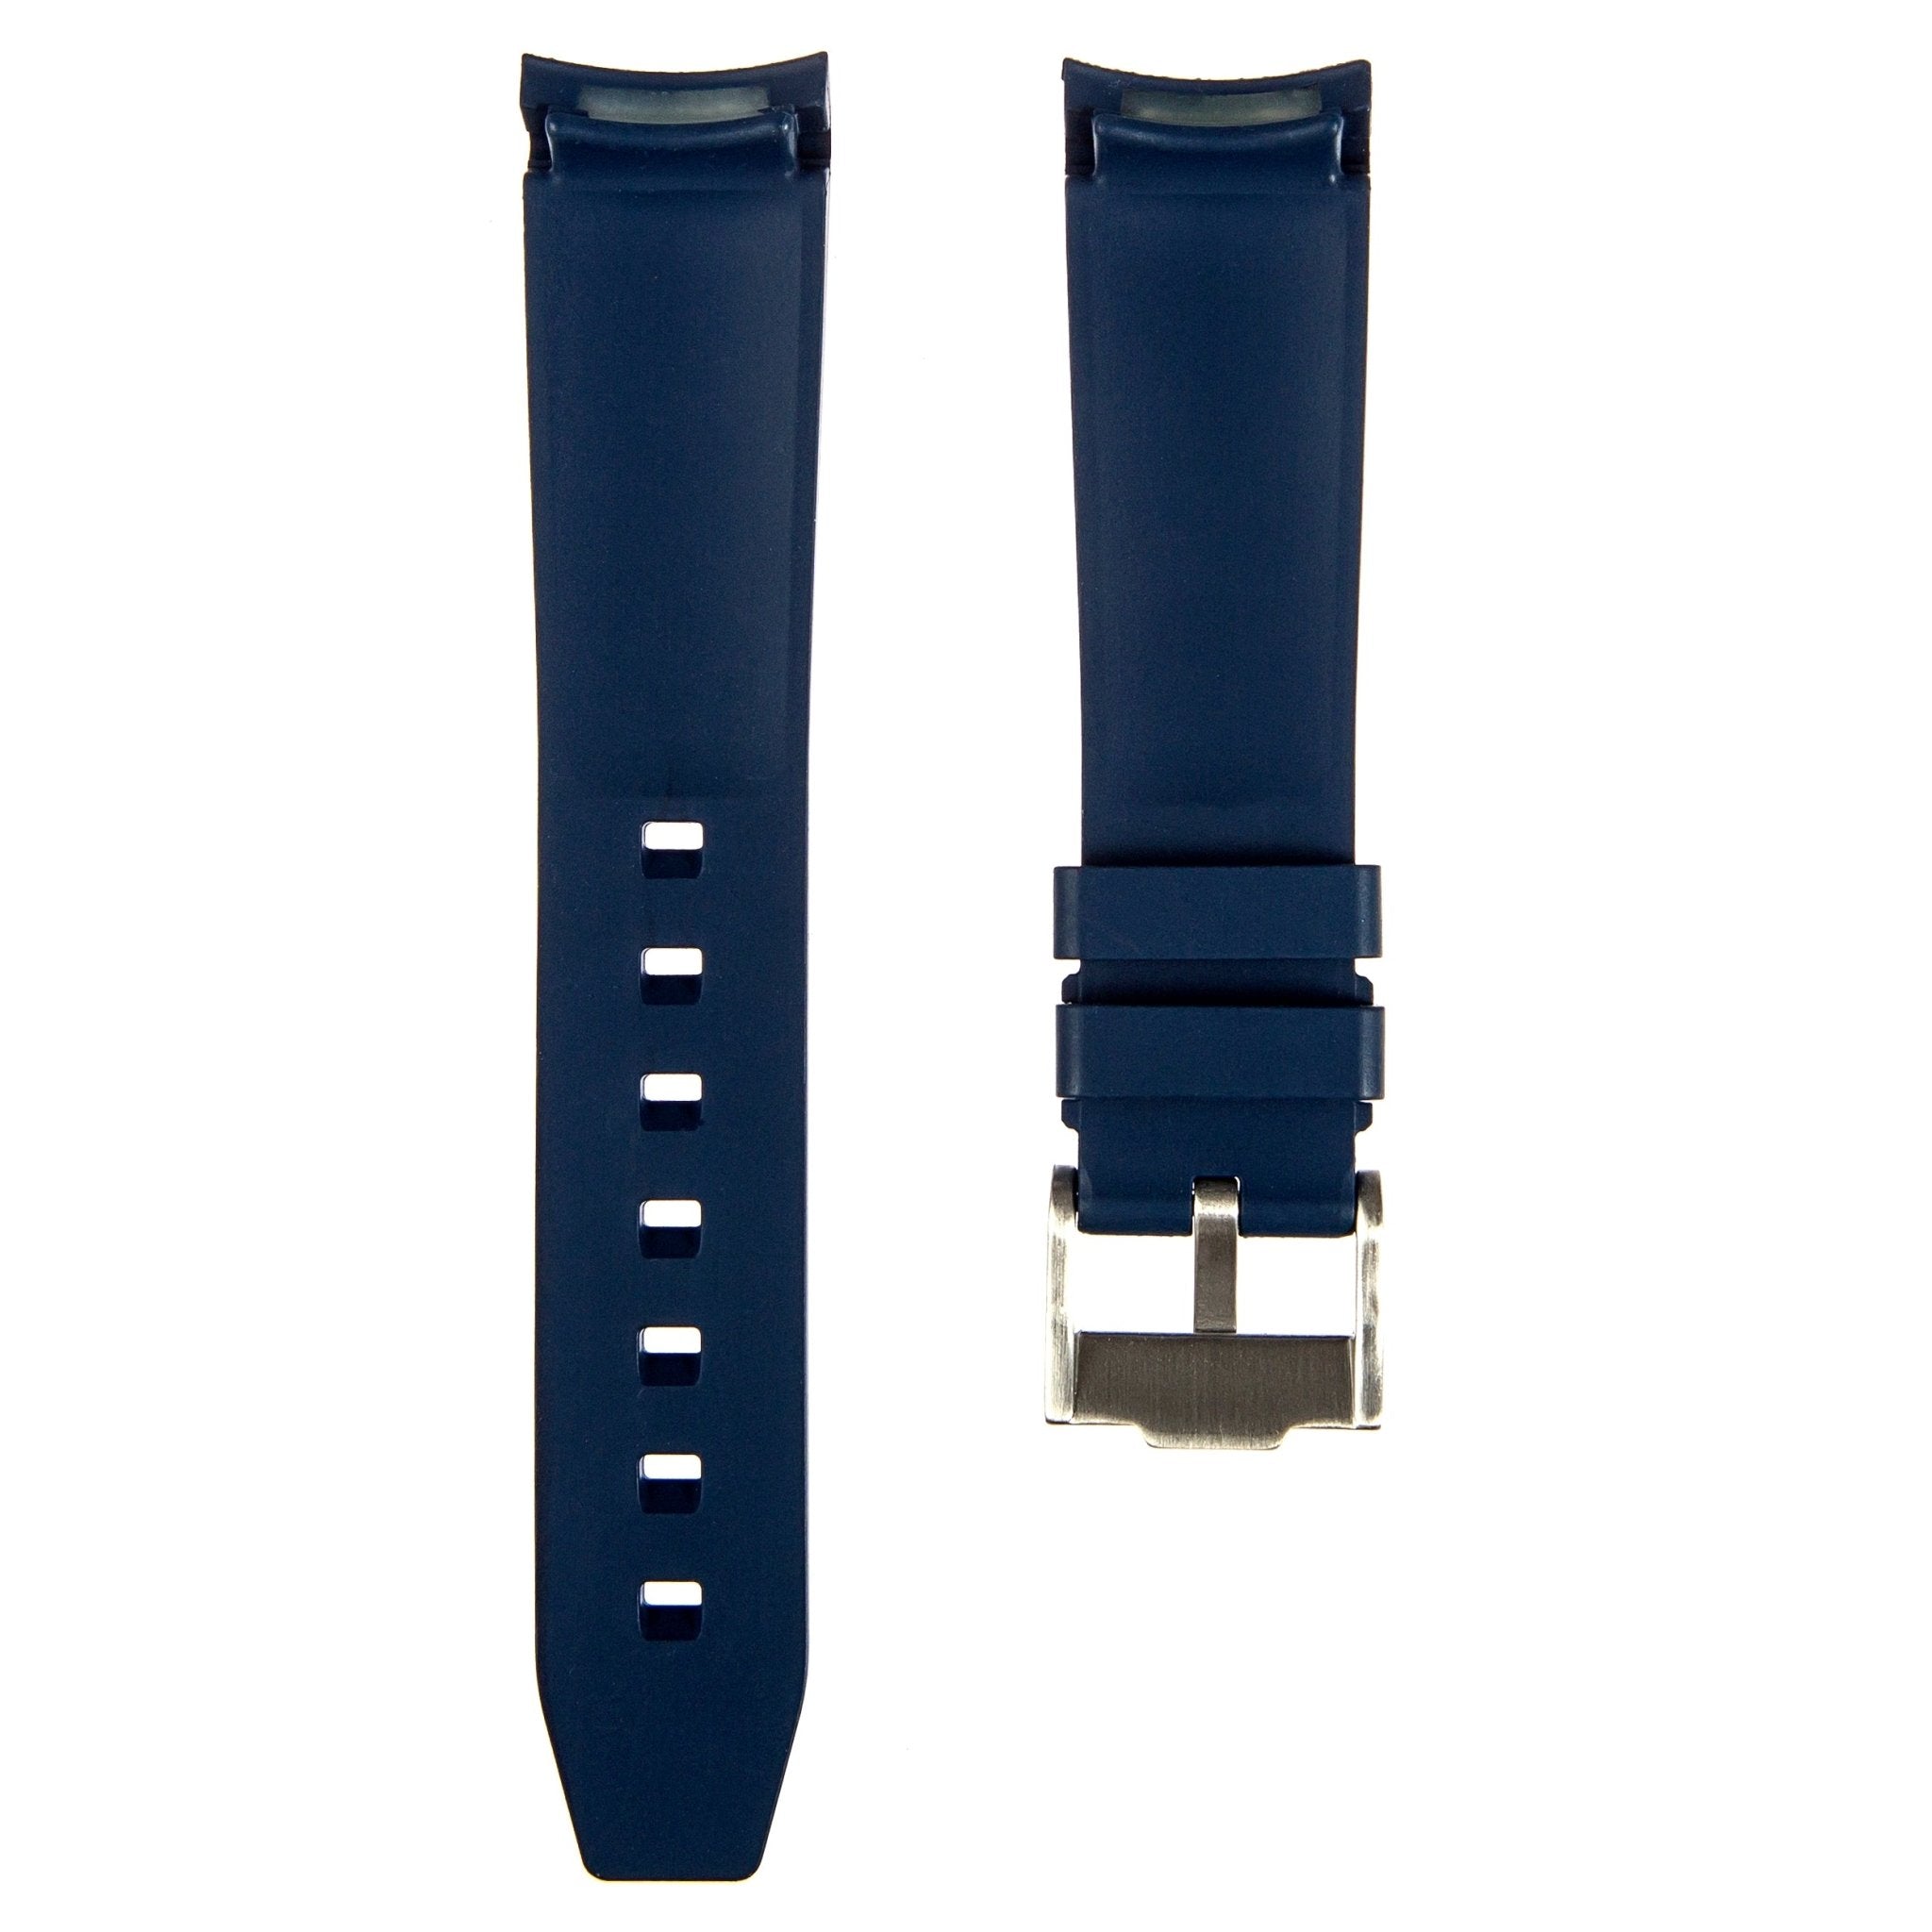 Forge Curved End FKM Rubber Strap – Compatible with Rolex Submariner – Navy (2421) -Strapseeker